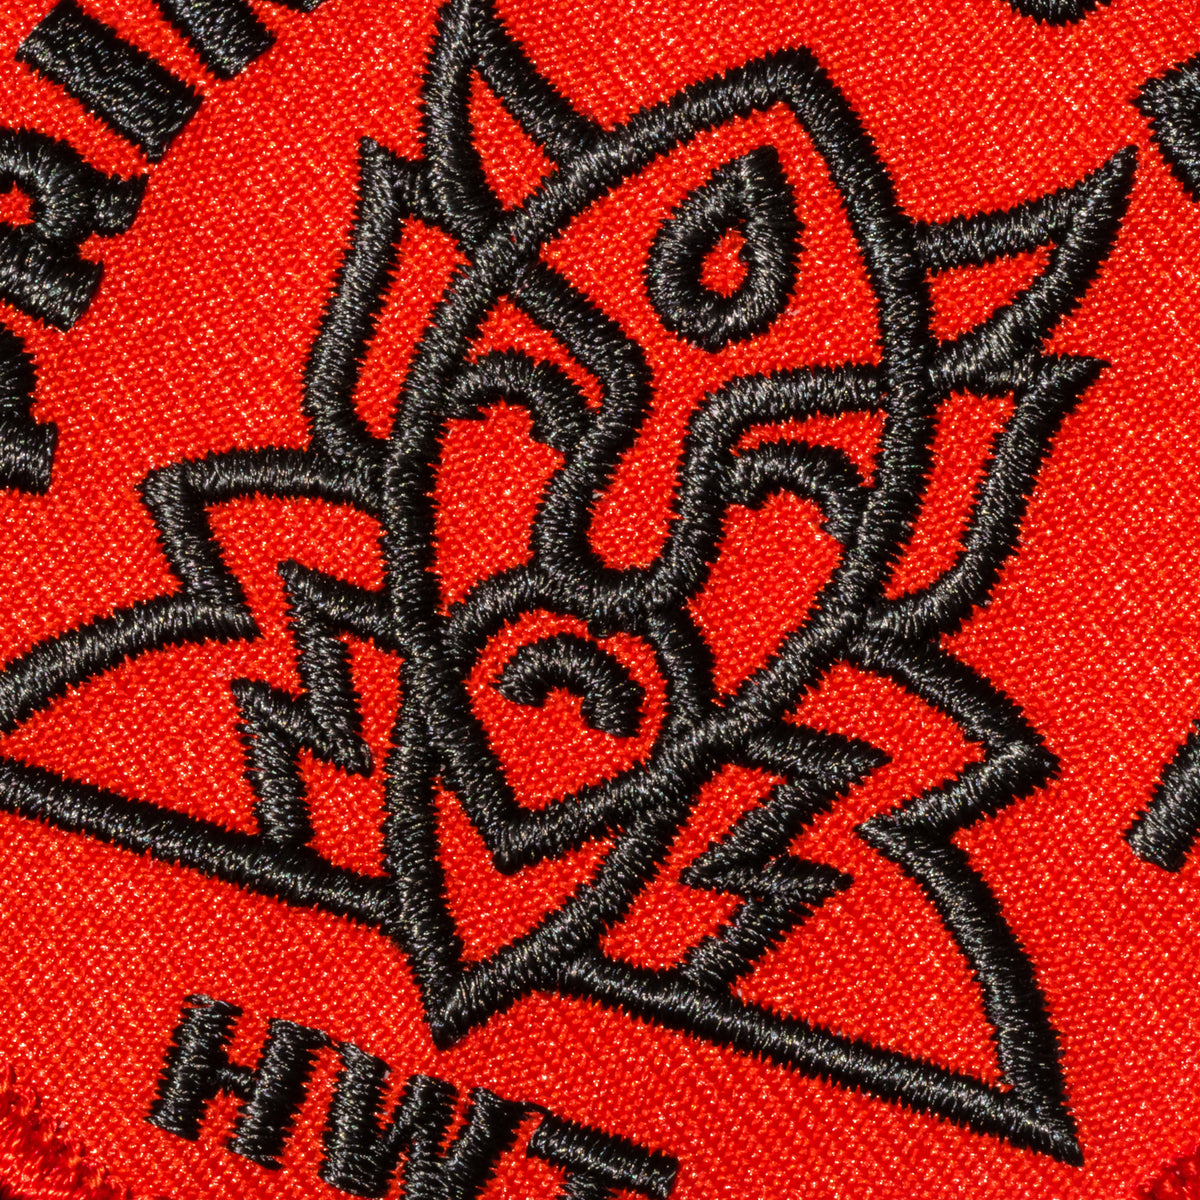 Iron-On Patches Designed by Aaron Draplin – Hamilton Wood Type Museum